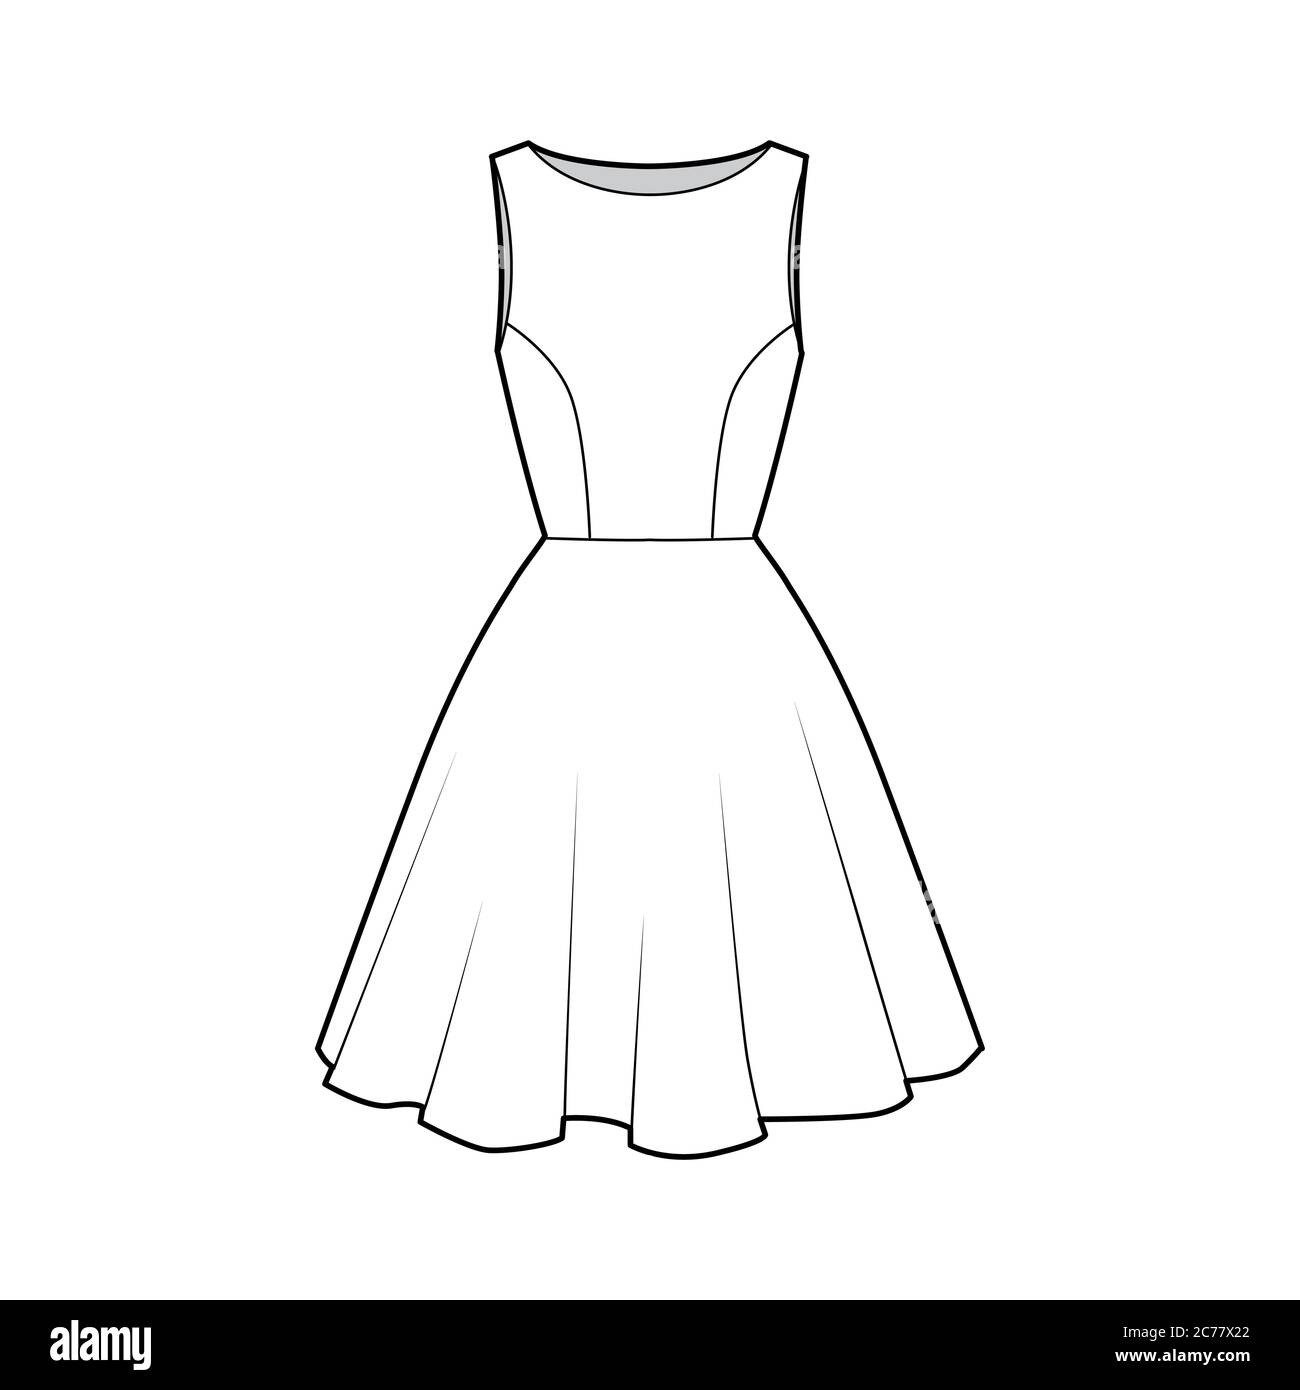 Dress technical fashion illustration with fitted body, boat neck ...